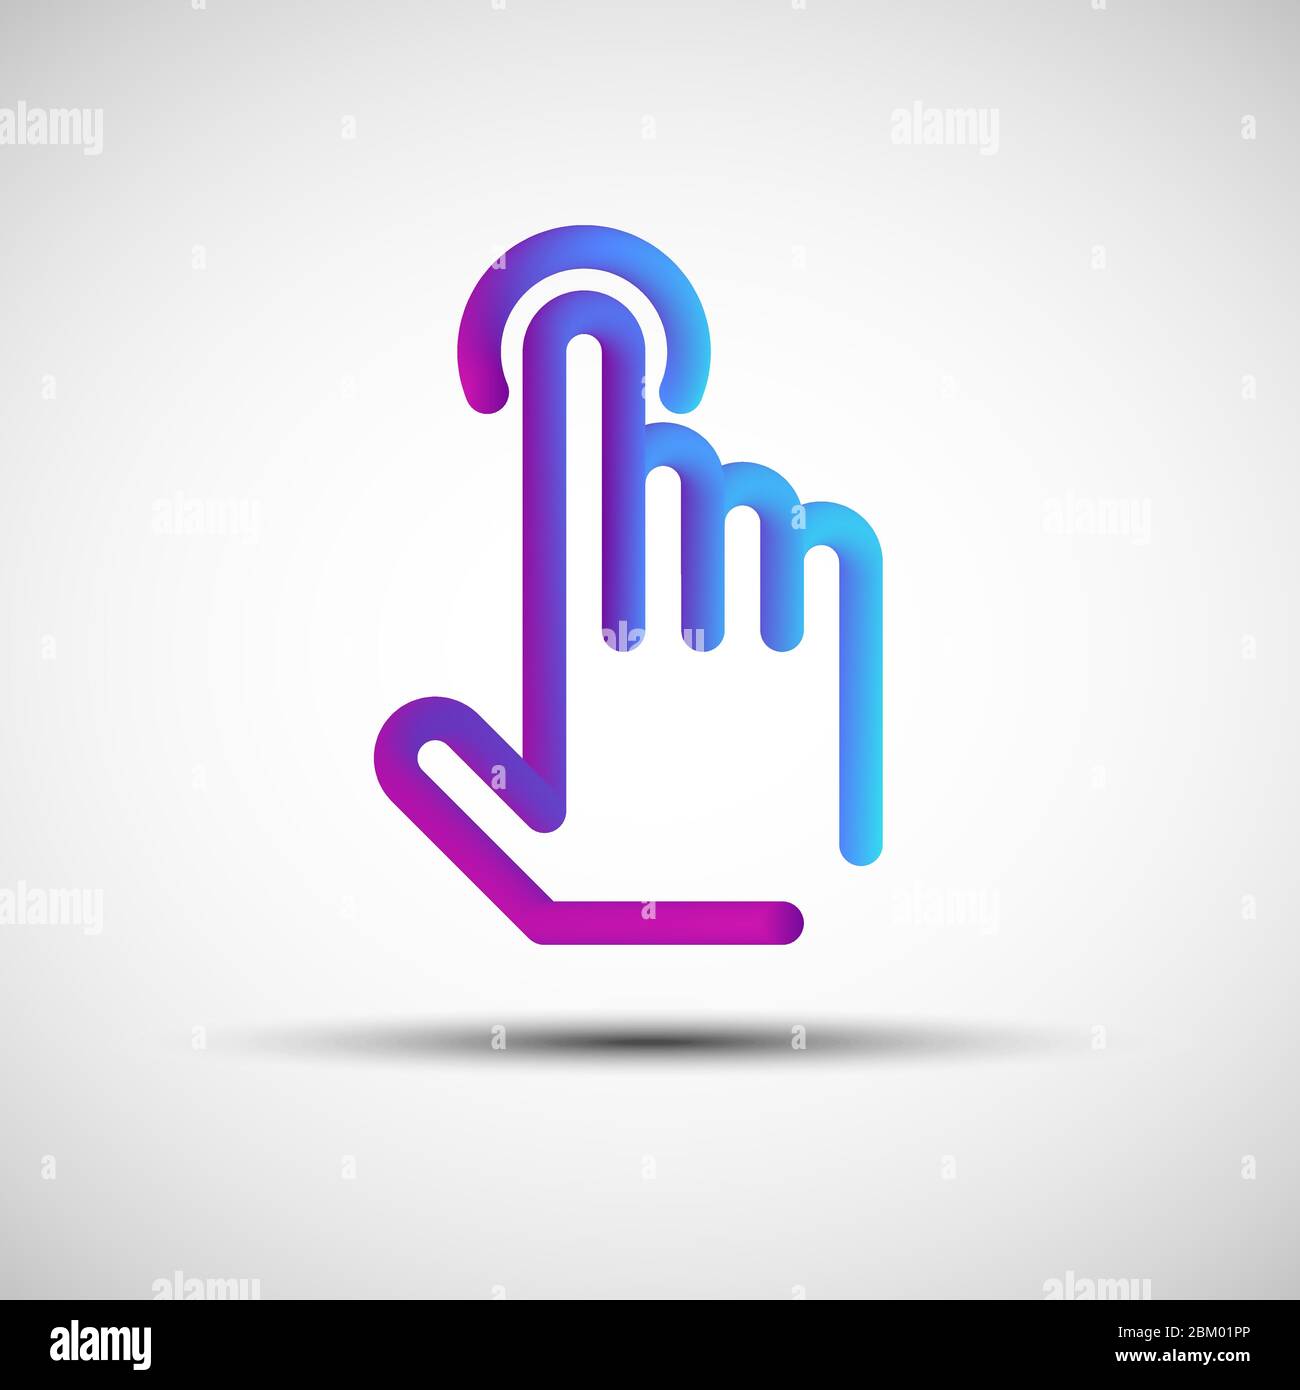 Hand pushing button blended line icon. Vector illustration of liquid 3d hand with button icon, logo, sign or emblem over white background Stock Vector